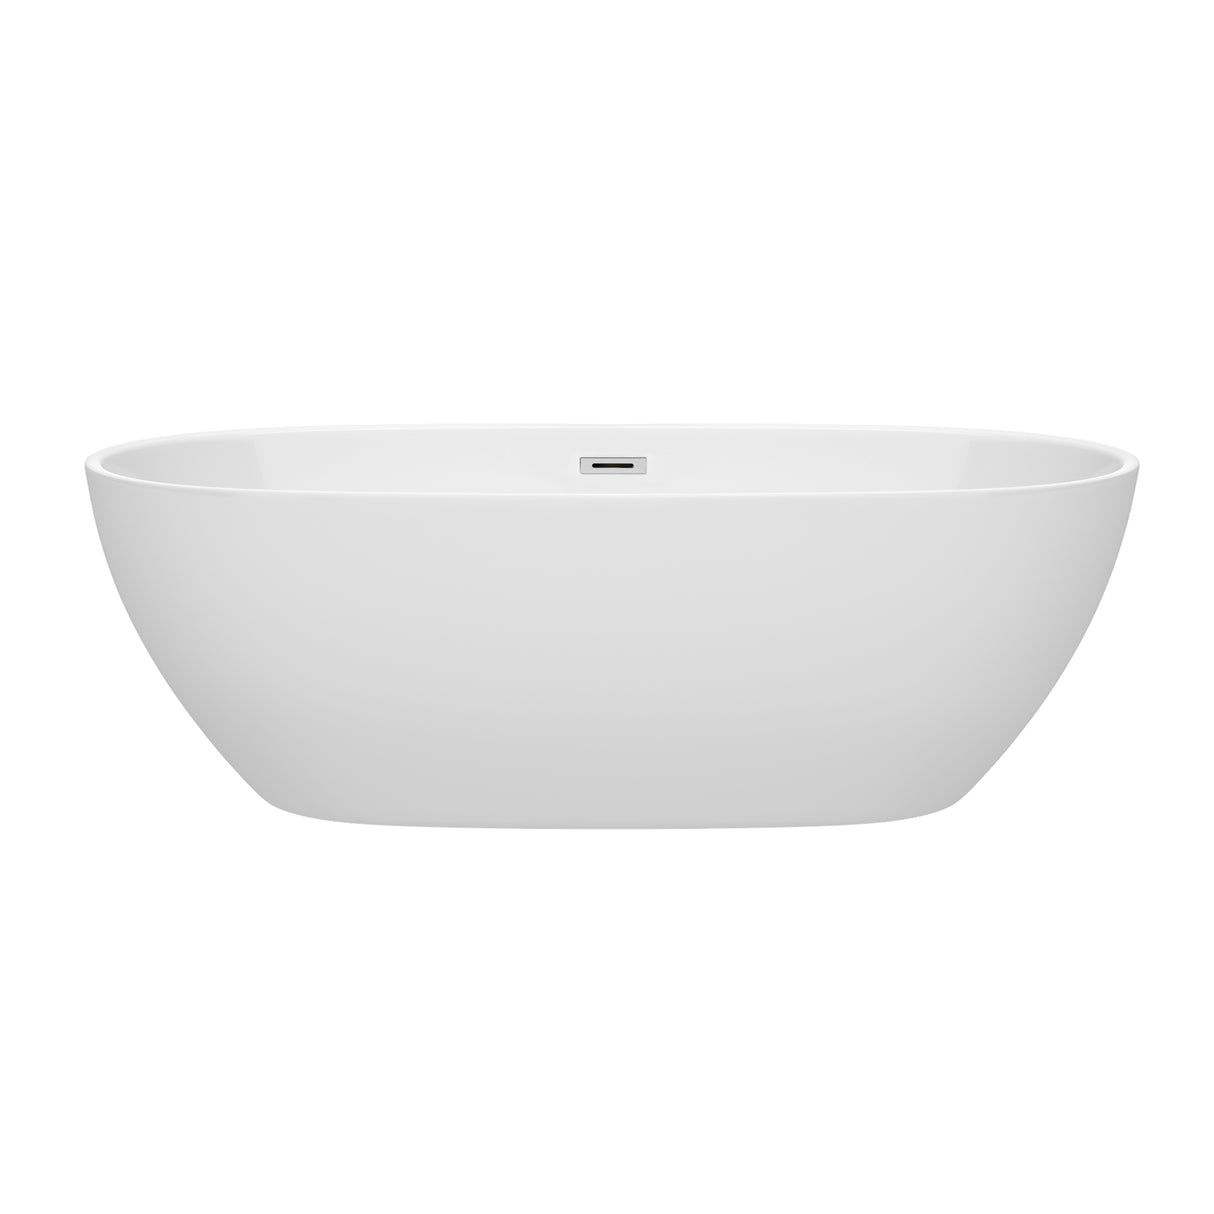 Juno 71 Inch Freestanding Bathtub in White with Polished Chrome Drain and Overflow Trim